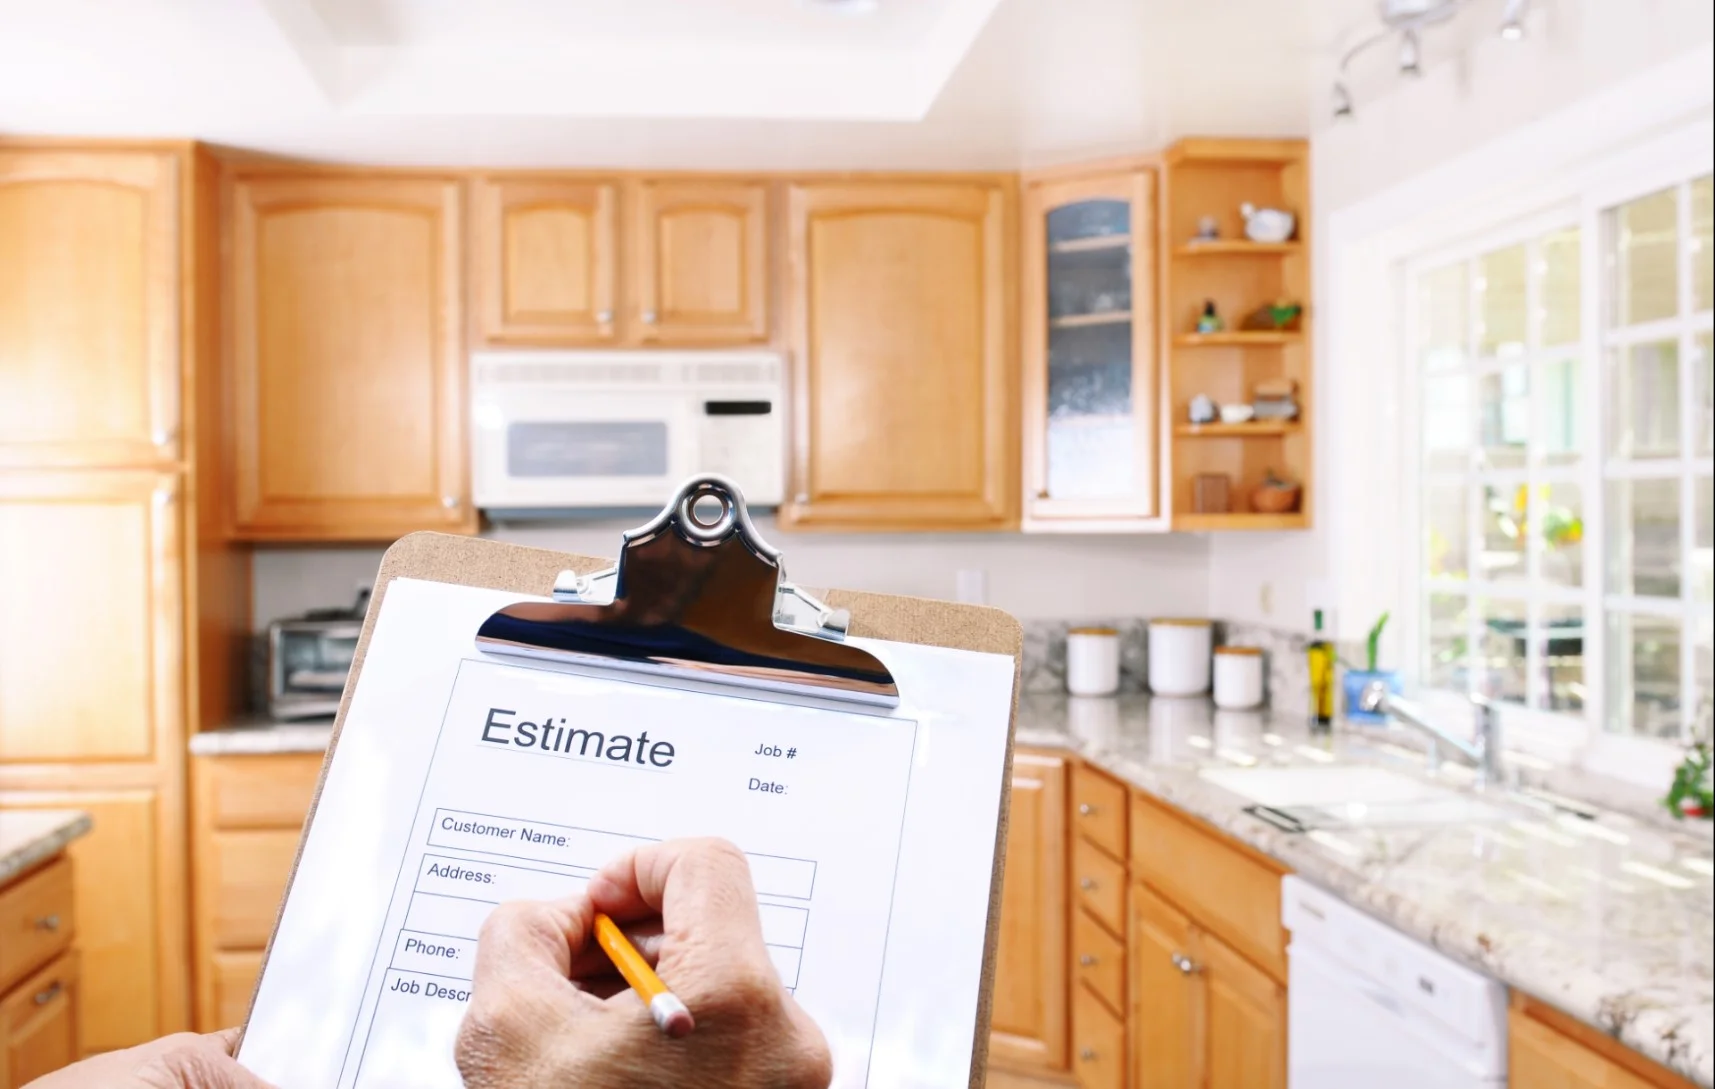 Photo of someone taking an estimate of a kitchen